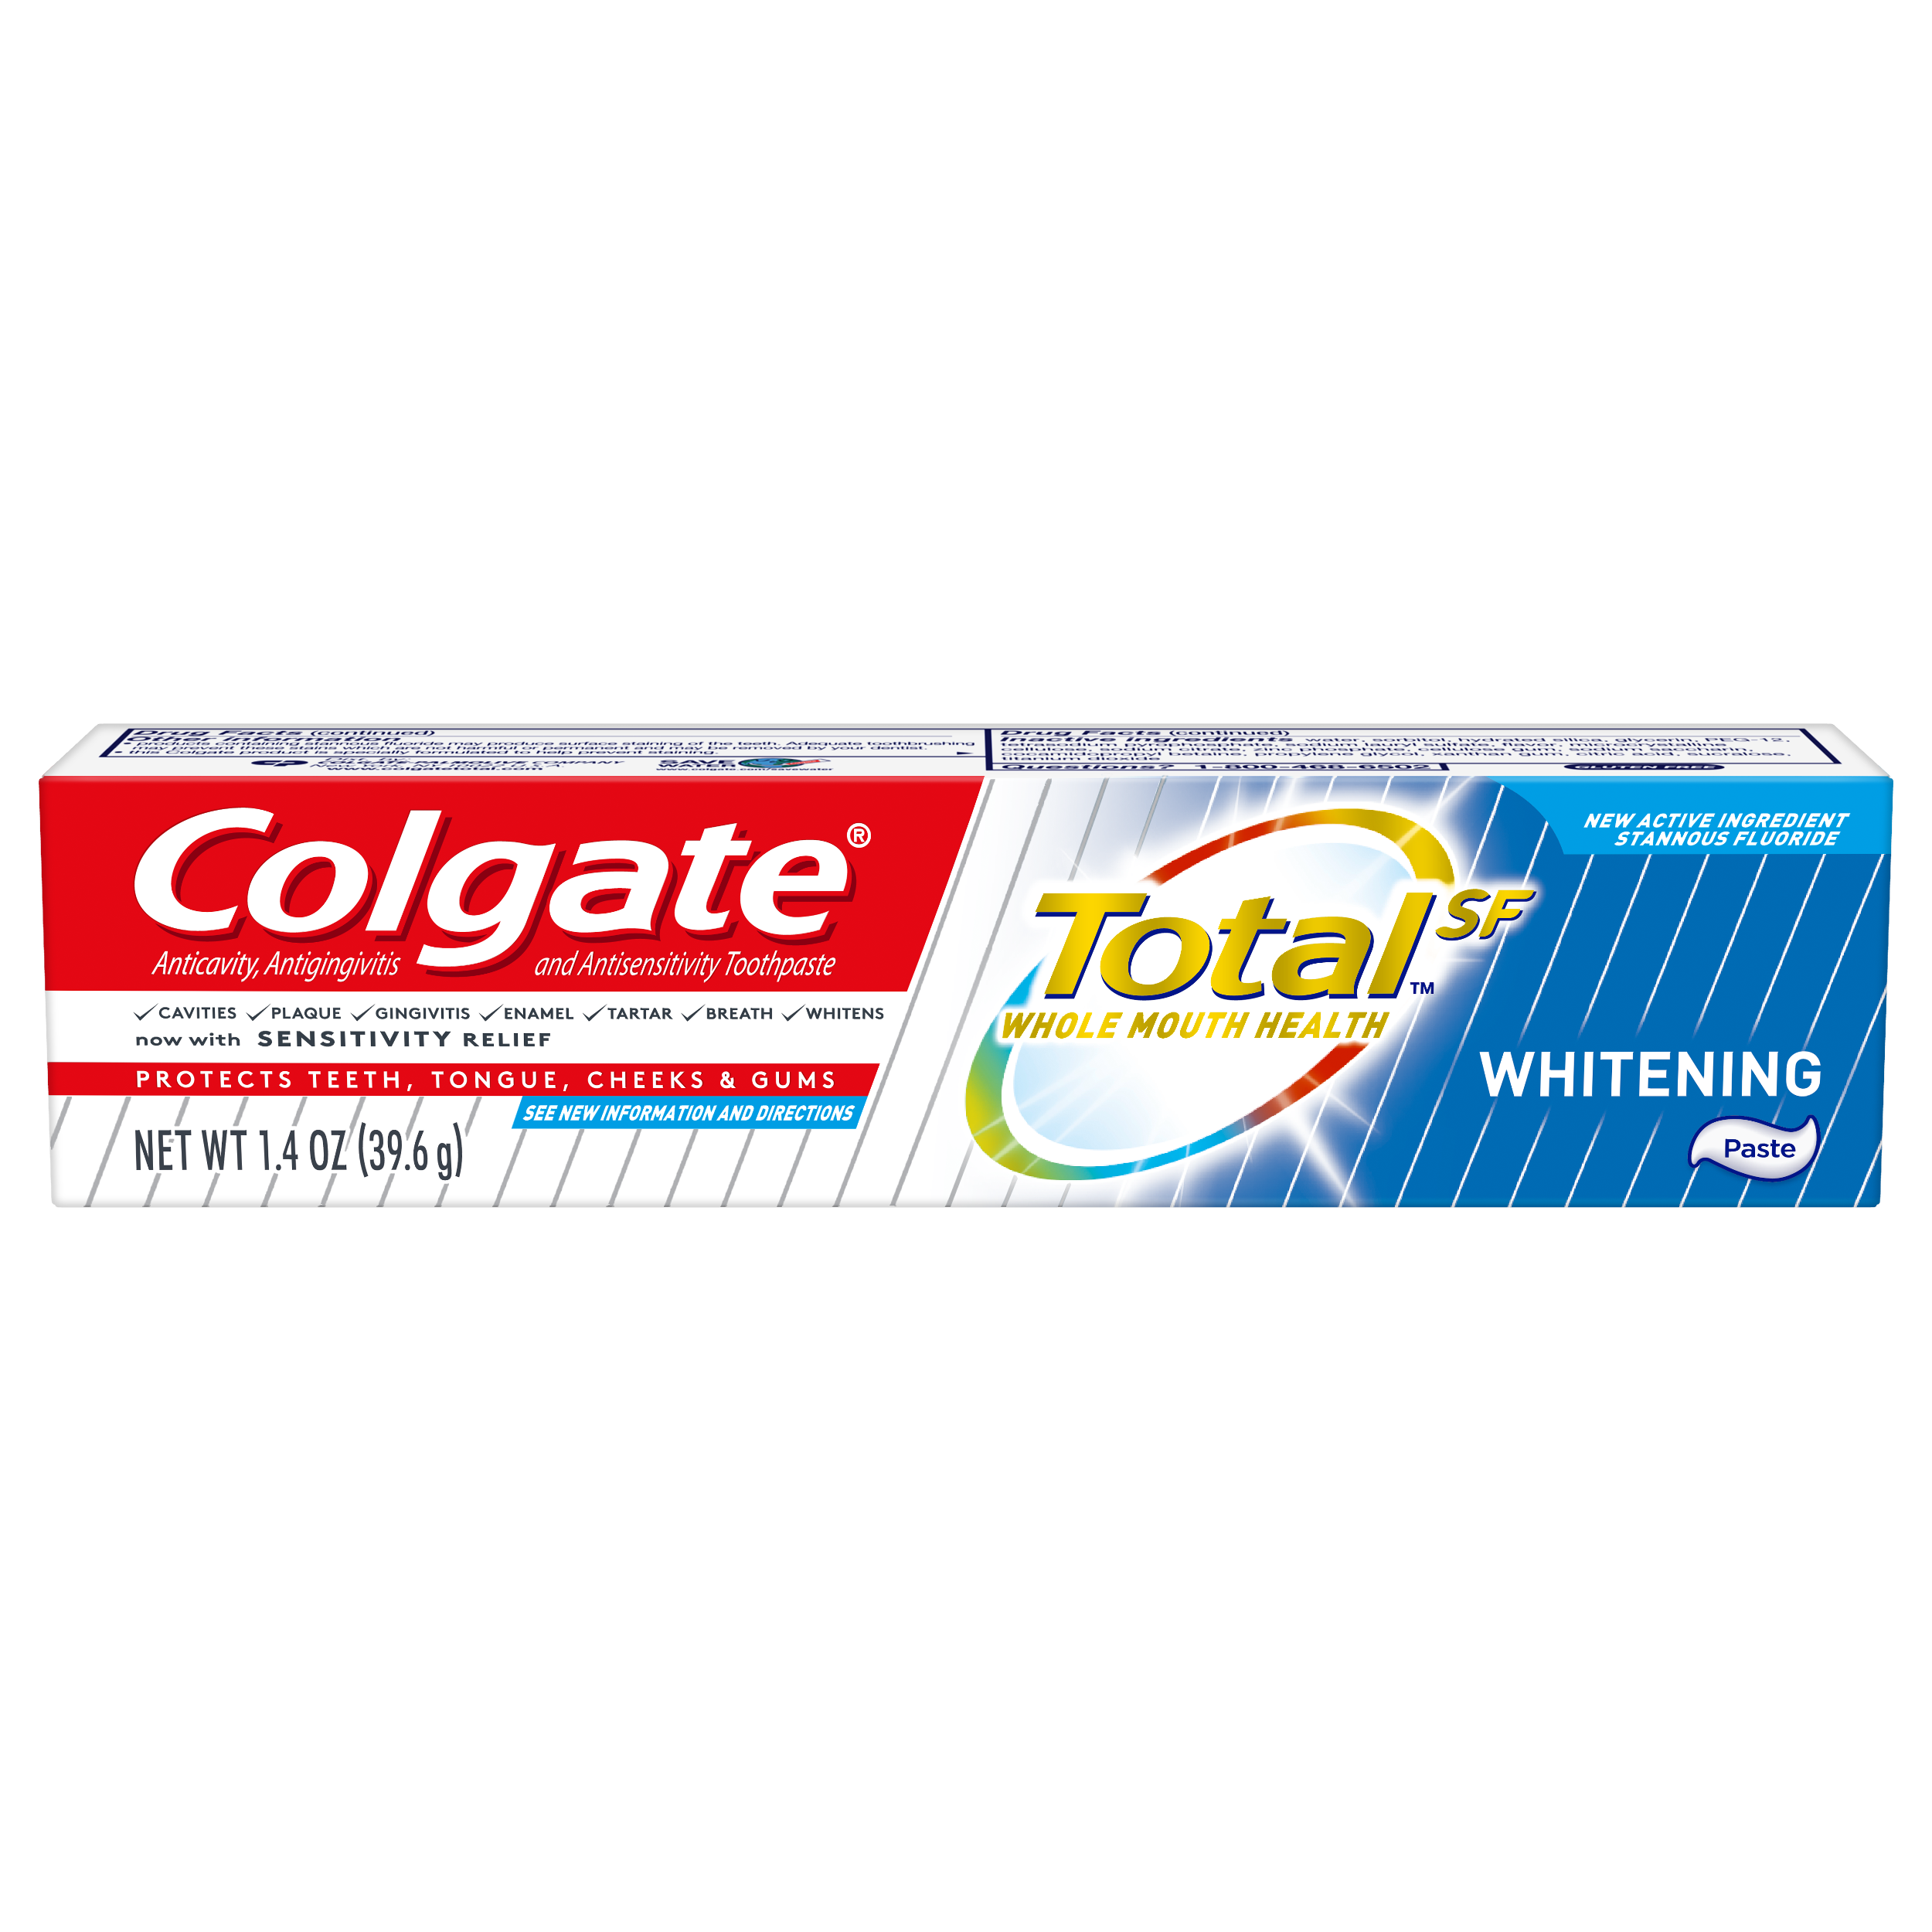 Detail Colgate Toothpaste Pictures Nomer 7